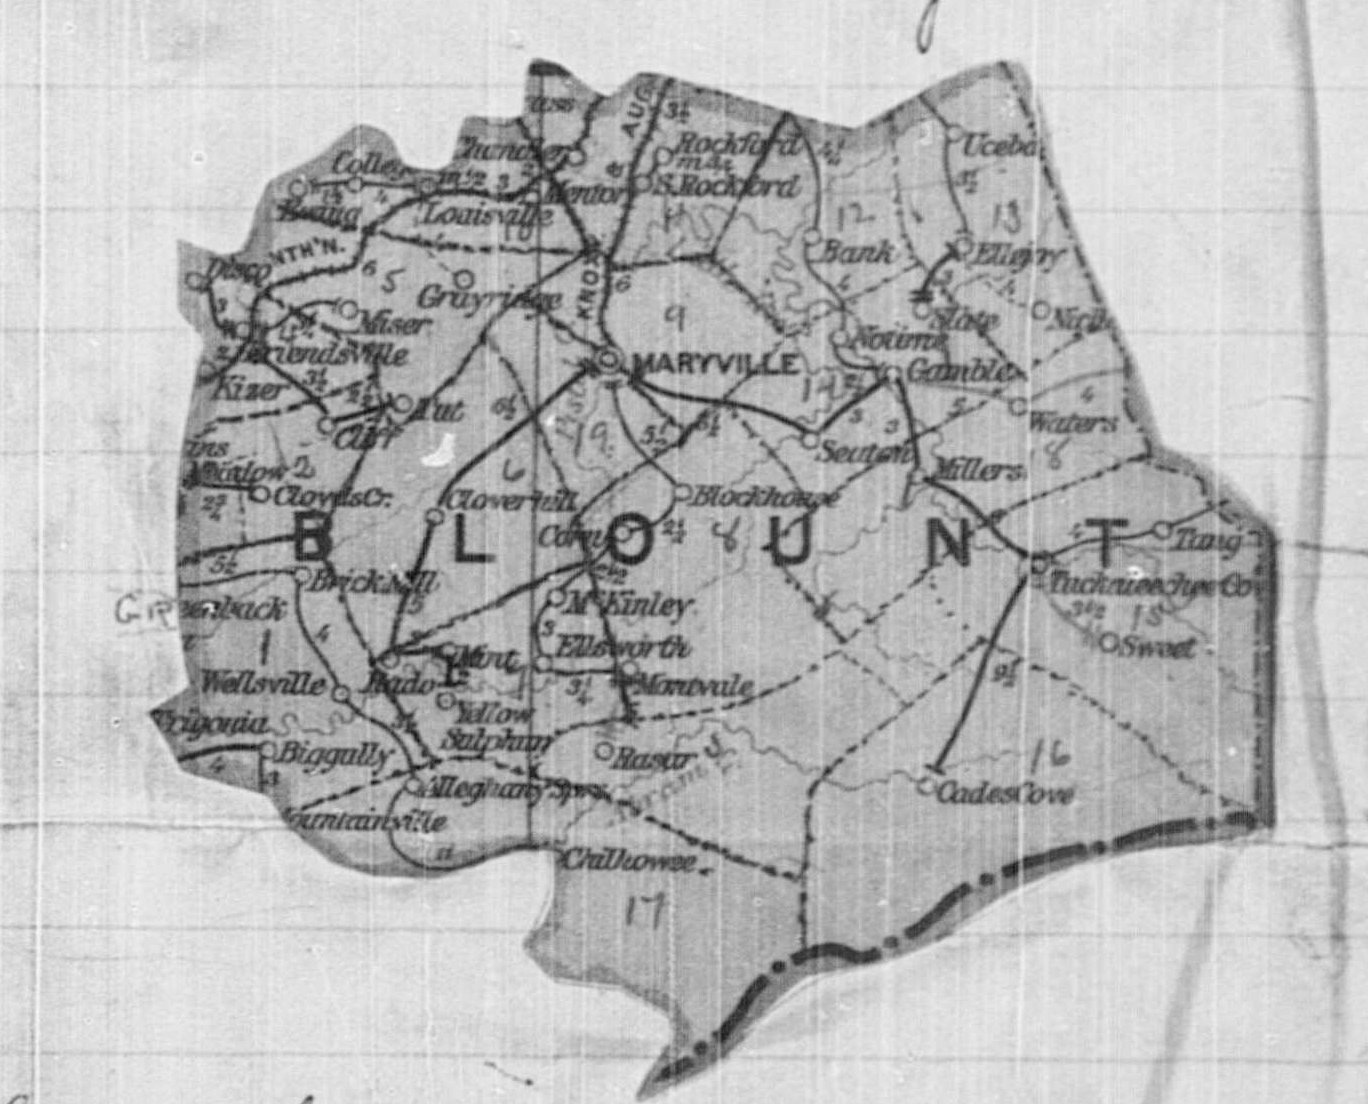 1900 Blount County Census Districts